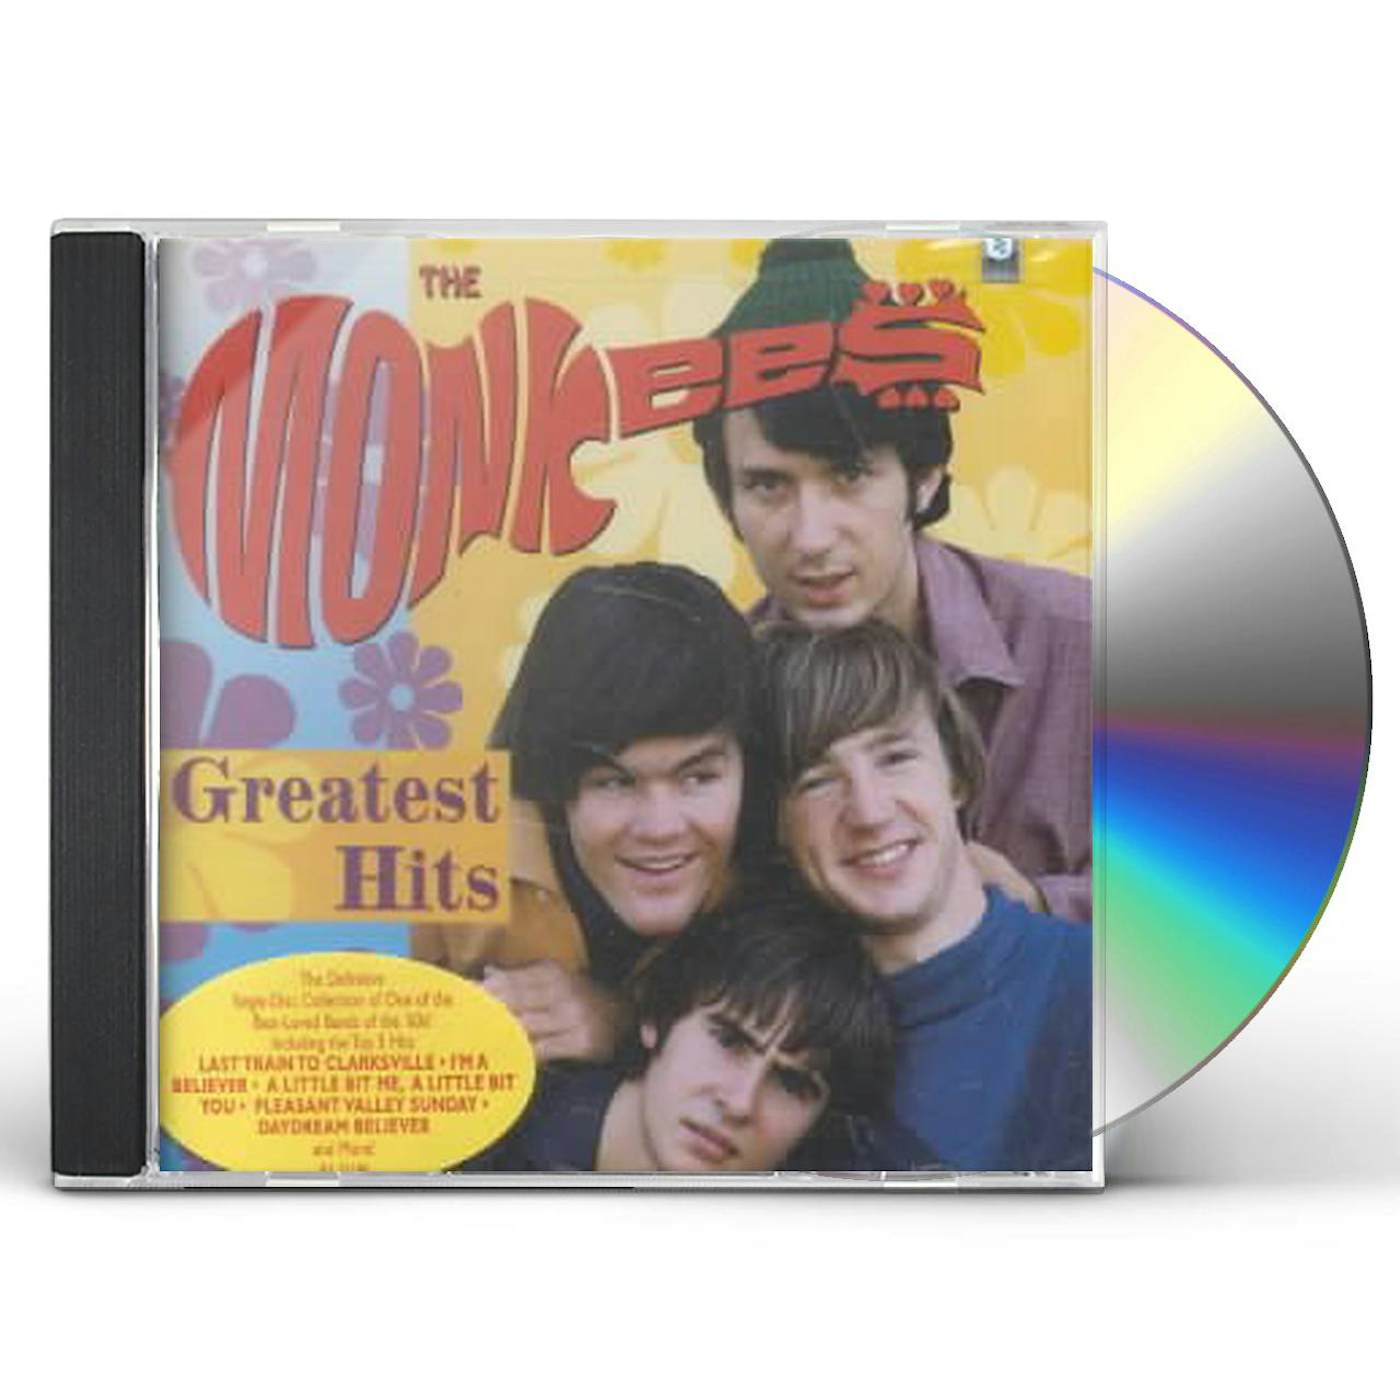 The Monkees GREATEST HITS CD